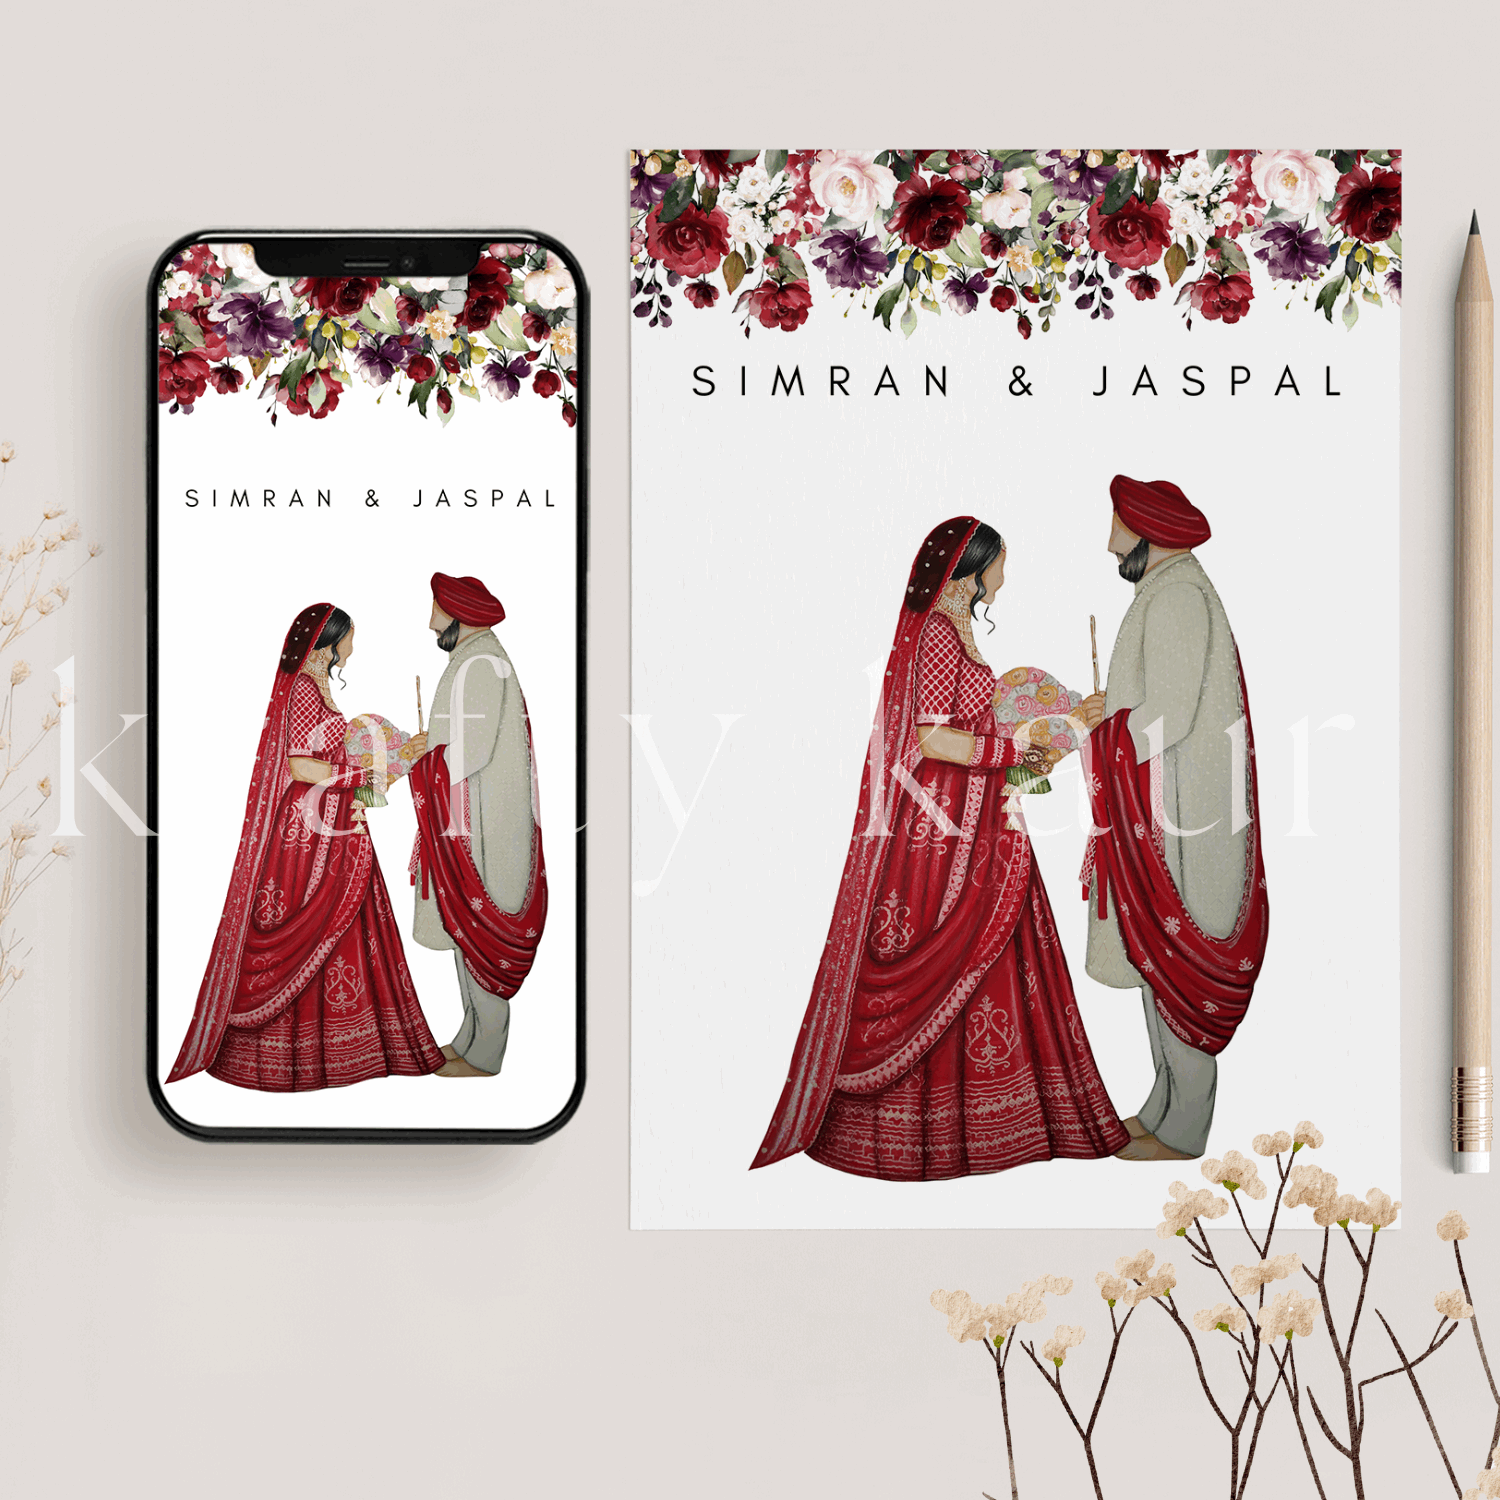 Sikh Digital Wedding Invitation on Mobile and Printed with an illustration